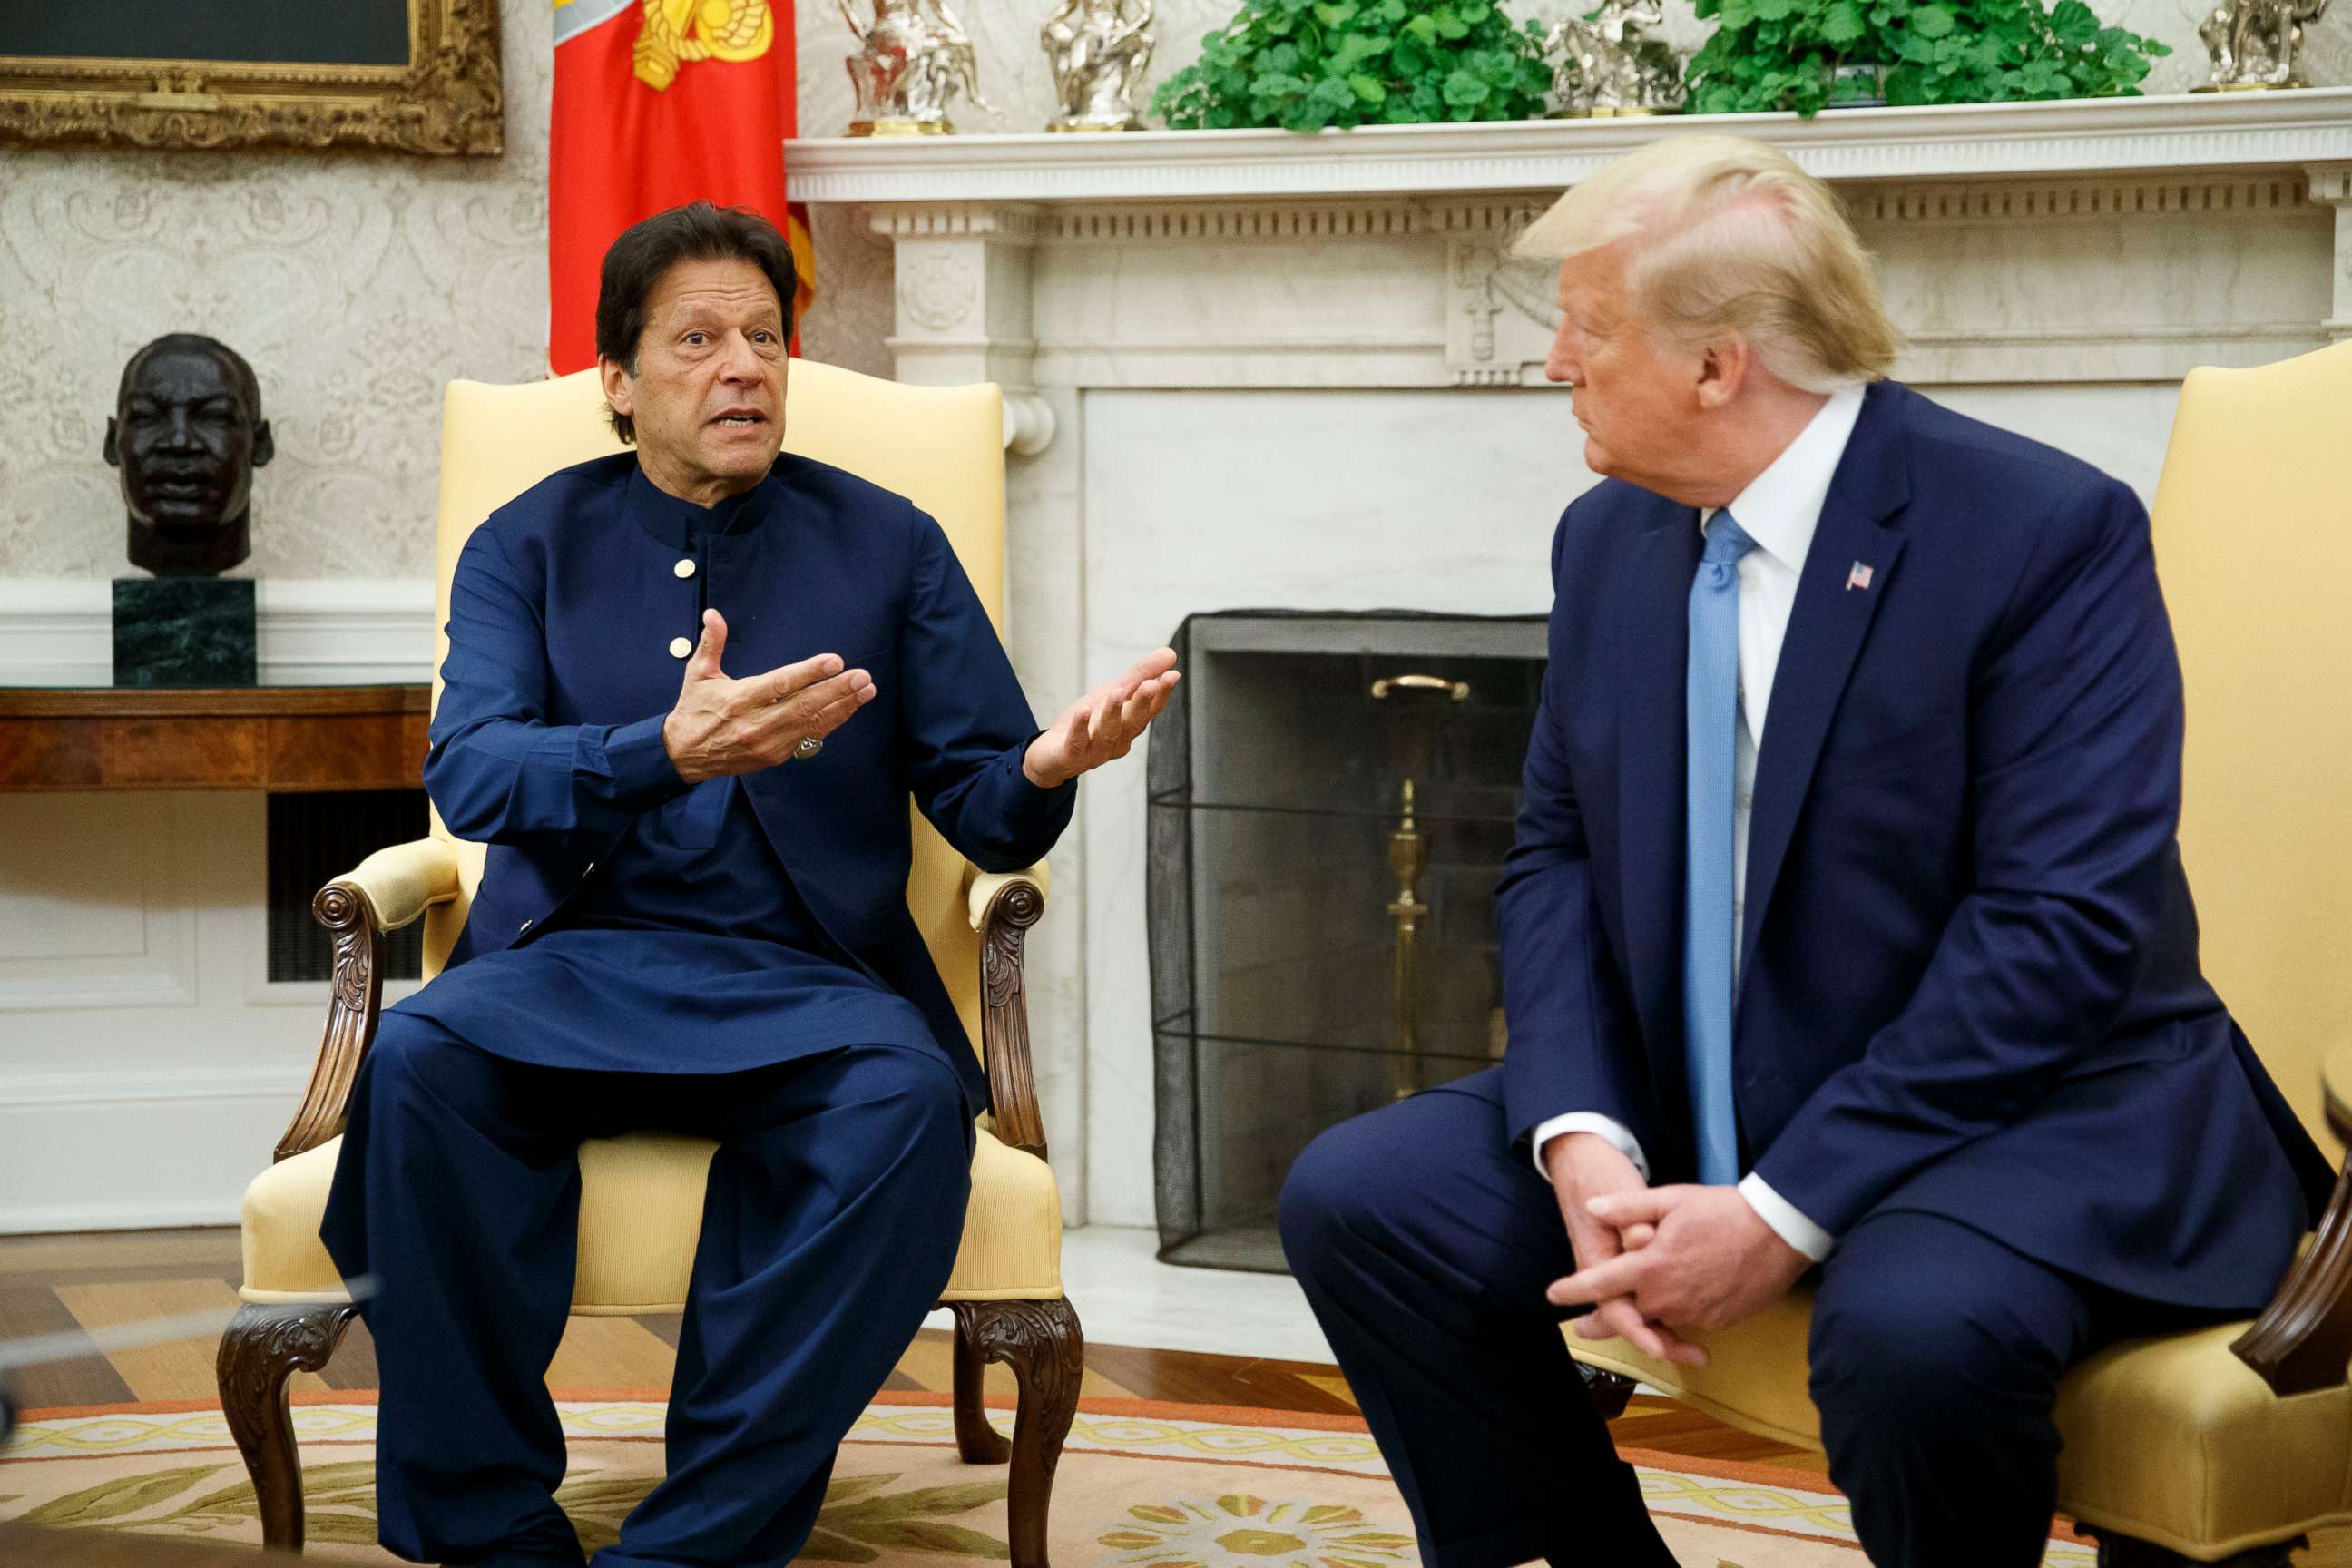 PHOTO: Pakistani Prime Minister Imran Khan speaks during a meeting with President Donald Trump in the Oval Office of the White House, July 22, 2019, in Washington.